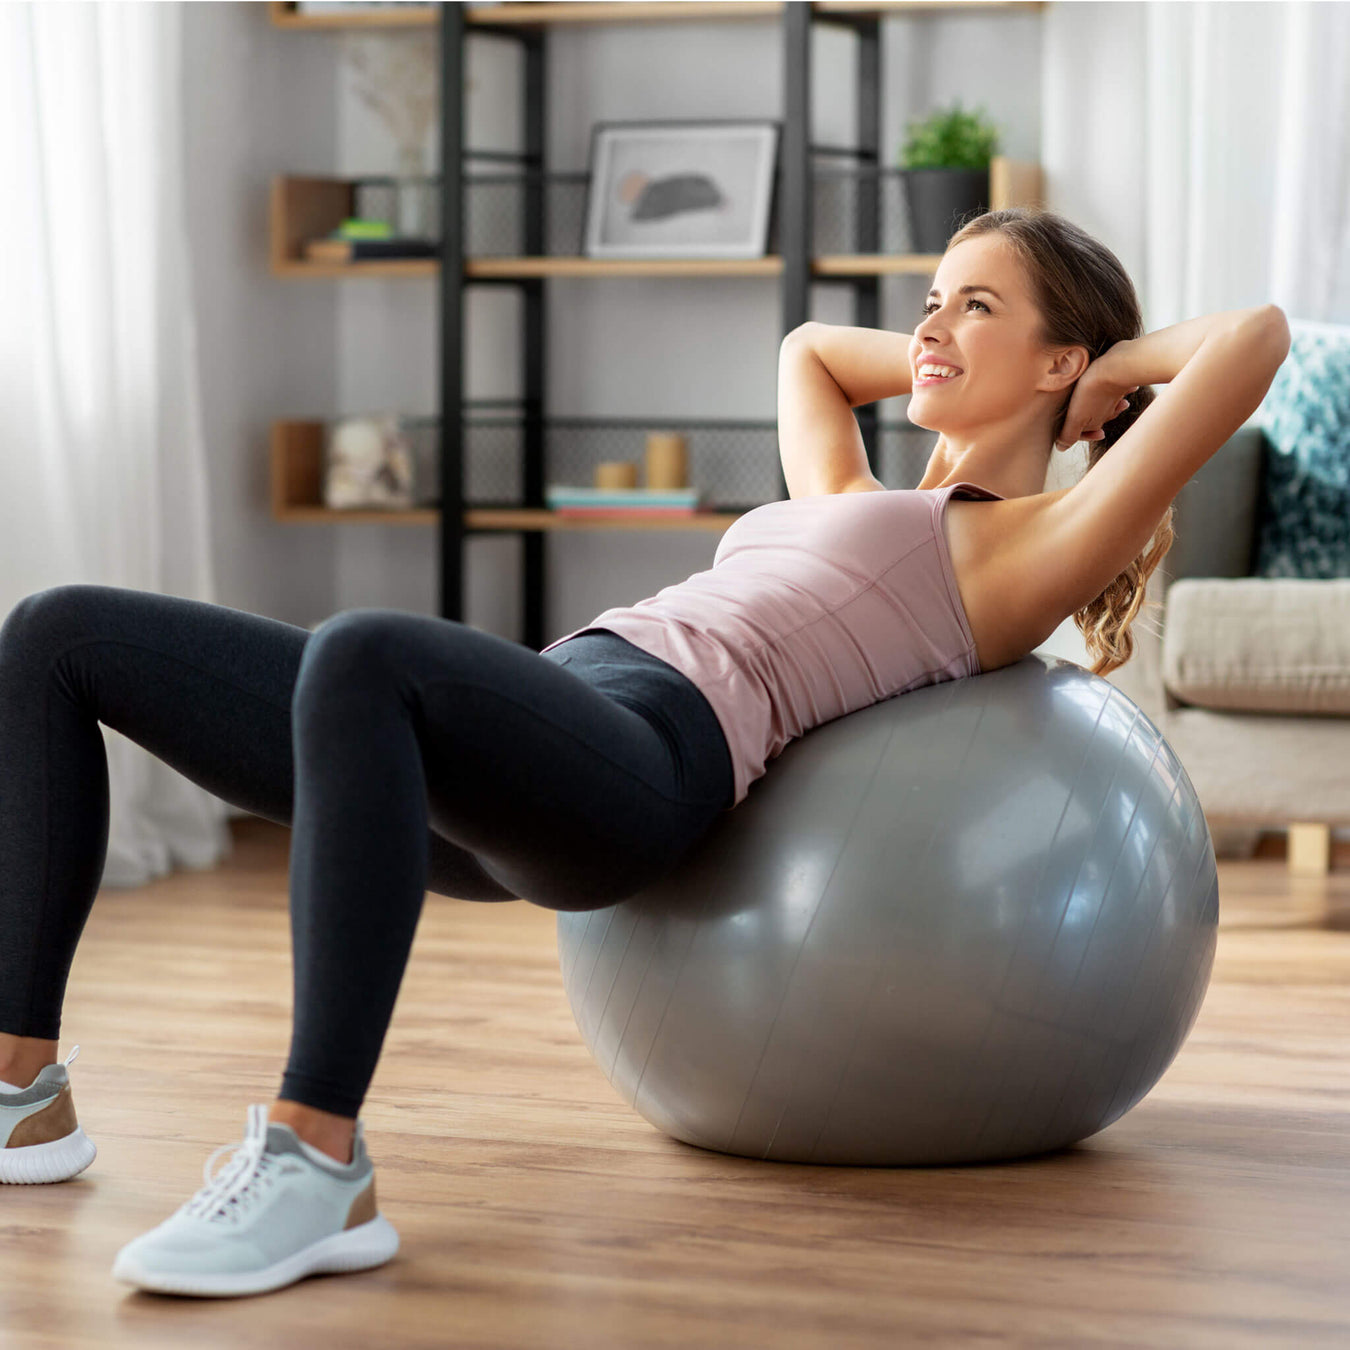 TheraBand Pro Series Exercise Ball in use by female model